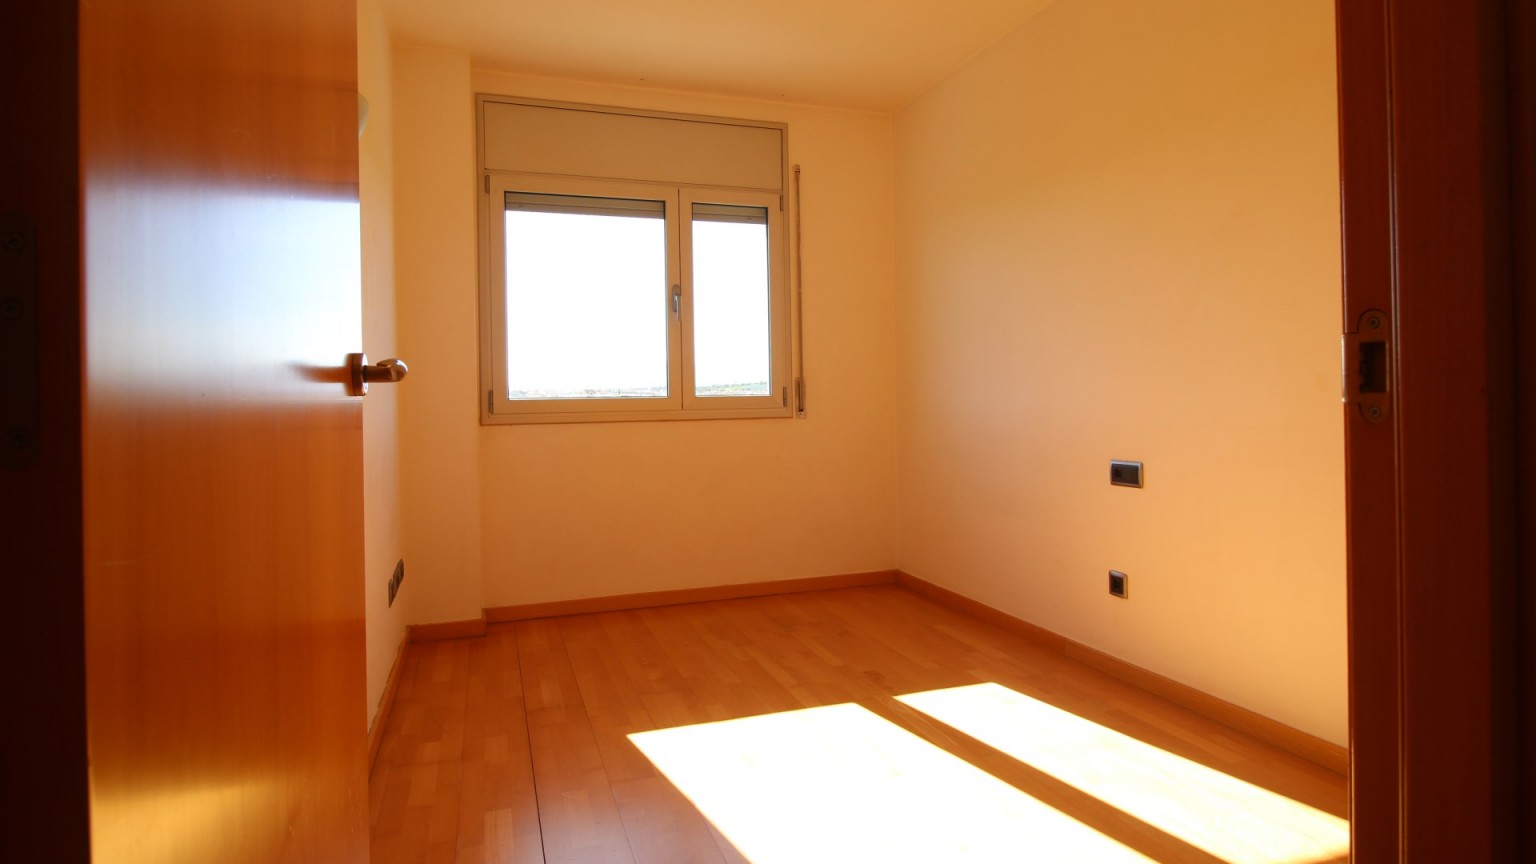 Flat for sale with parking and storage room, communal pool and garden, residential area.